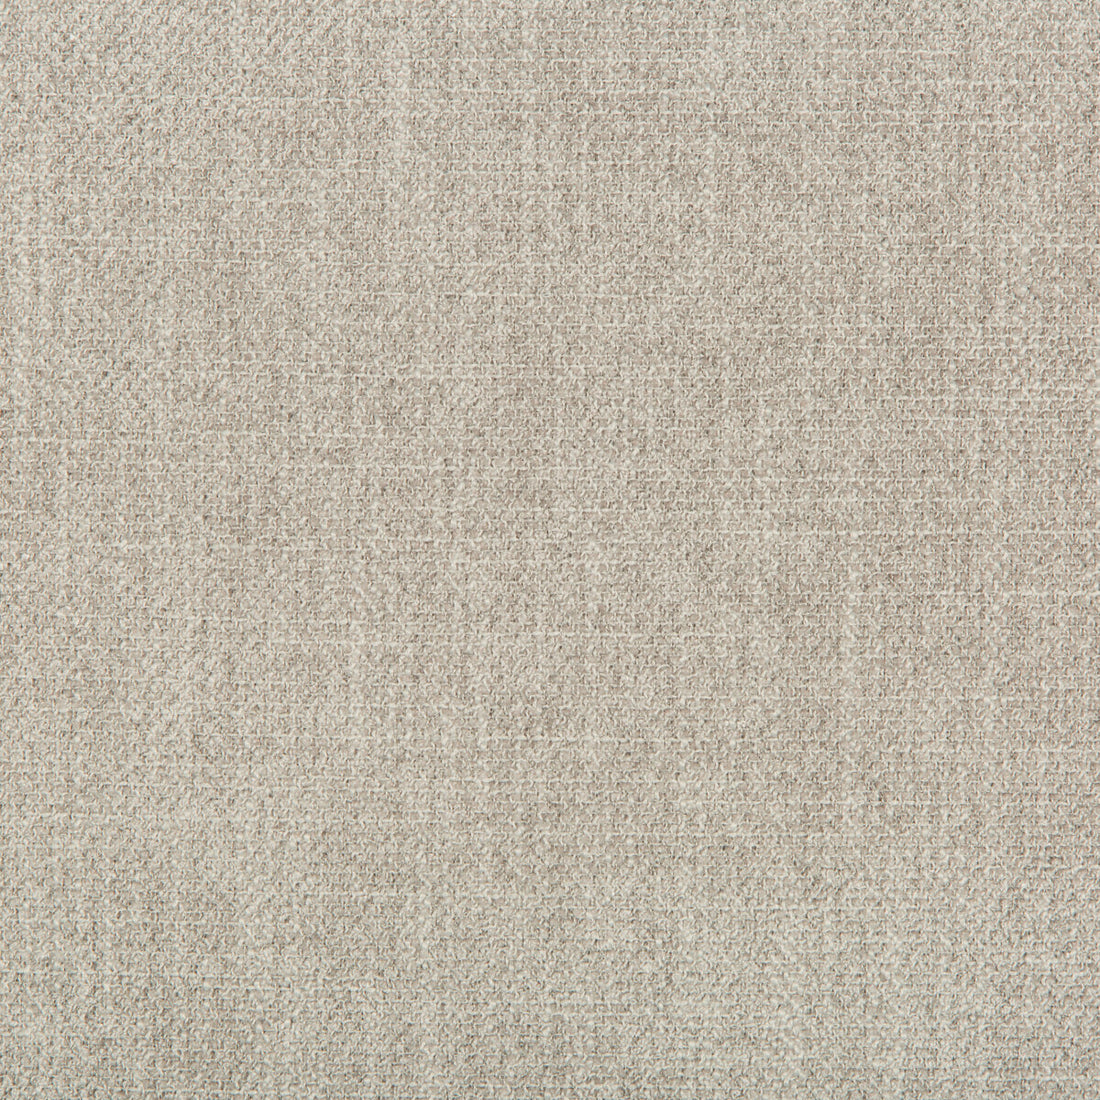 Kravet Contract fabric in 35404-16 color - pattern 35404.16.0 - by Kravet Contract in the Crypton Incase collection